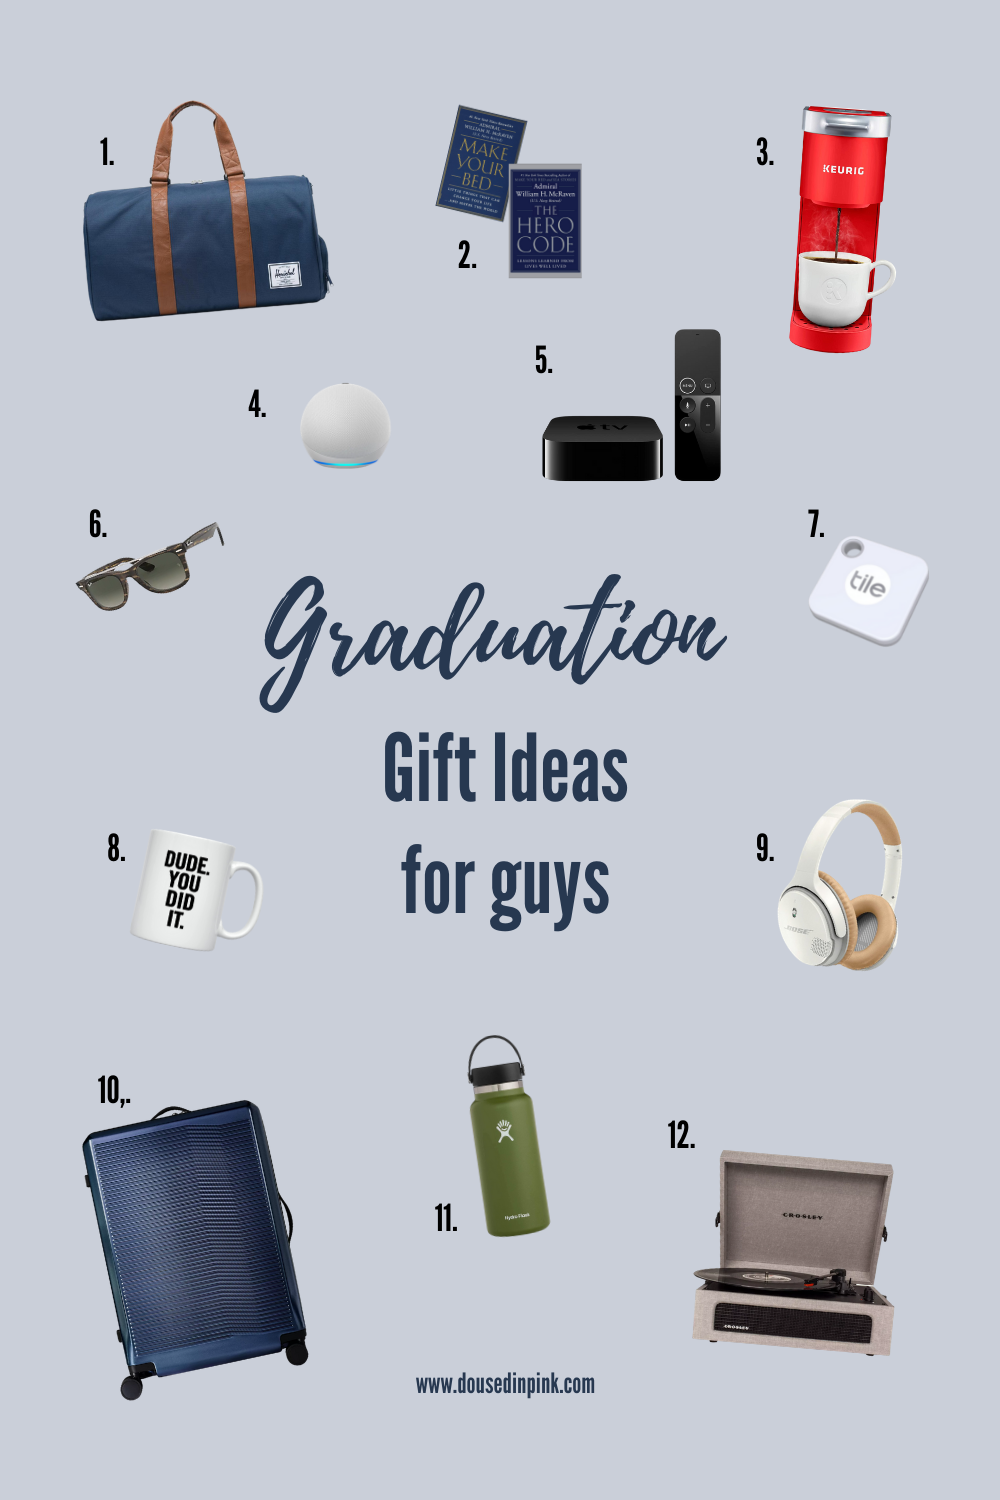 19 Best College Graduation Gifts for Guys